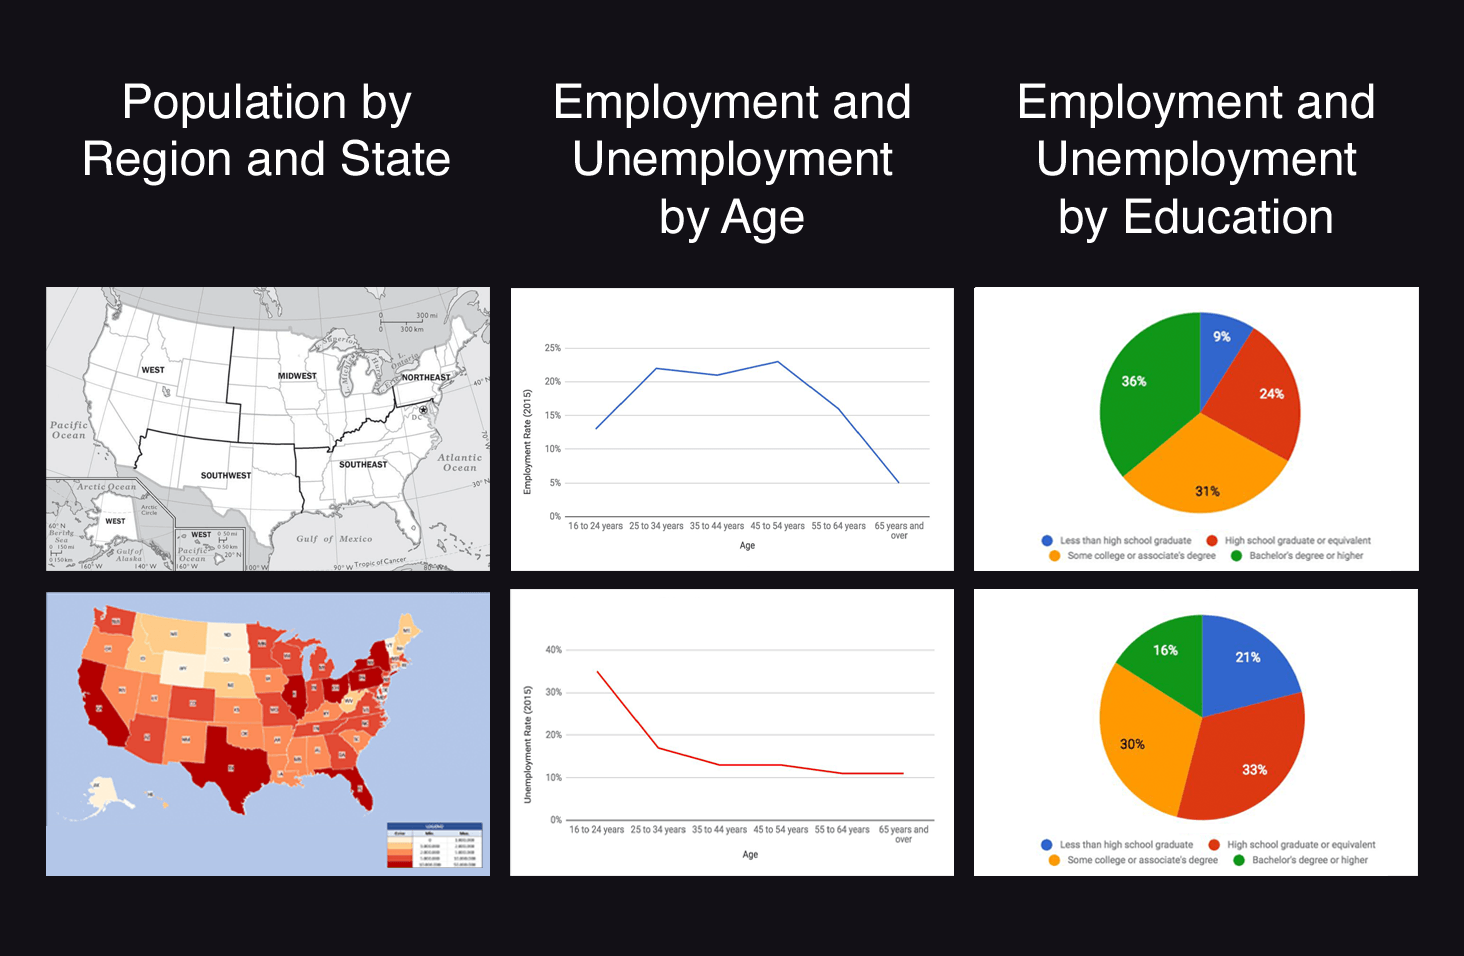 Left: Population by region and state, represented as heat maps. Middle: Employment and unemployment represented as line graphs. Right: Employment and unemployment by education, represented as pie charts.